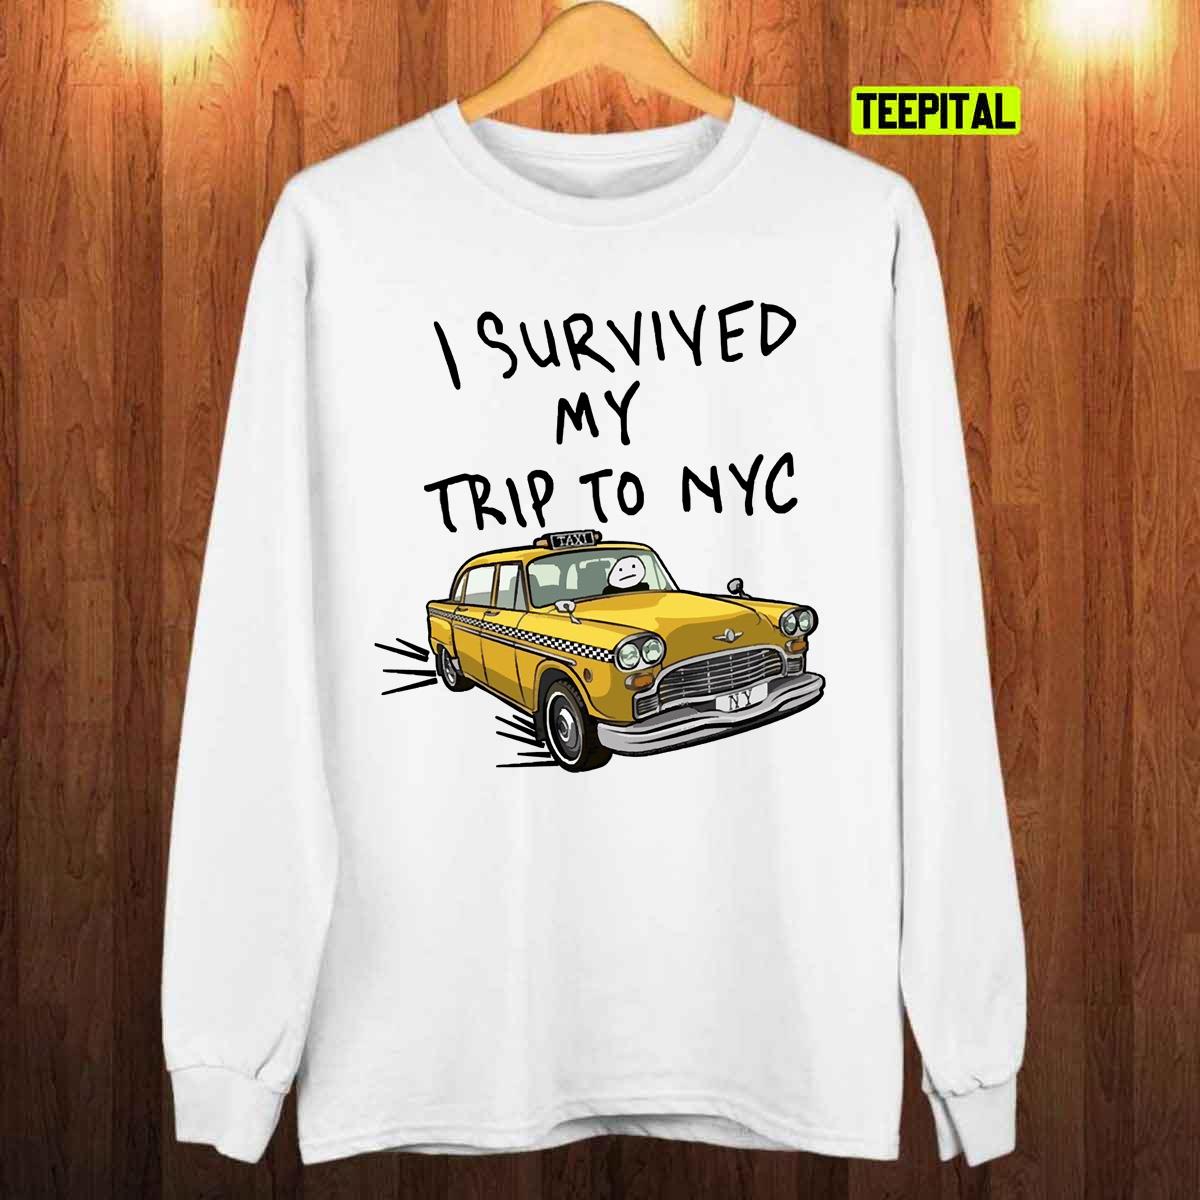 I Survived My Trip to NYC Yellow Cab T-Shirt